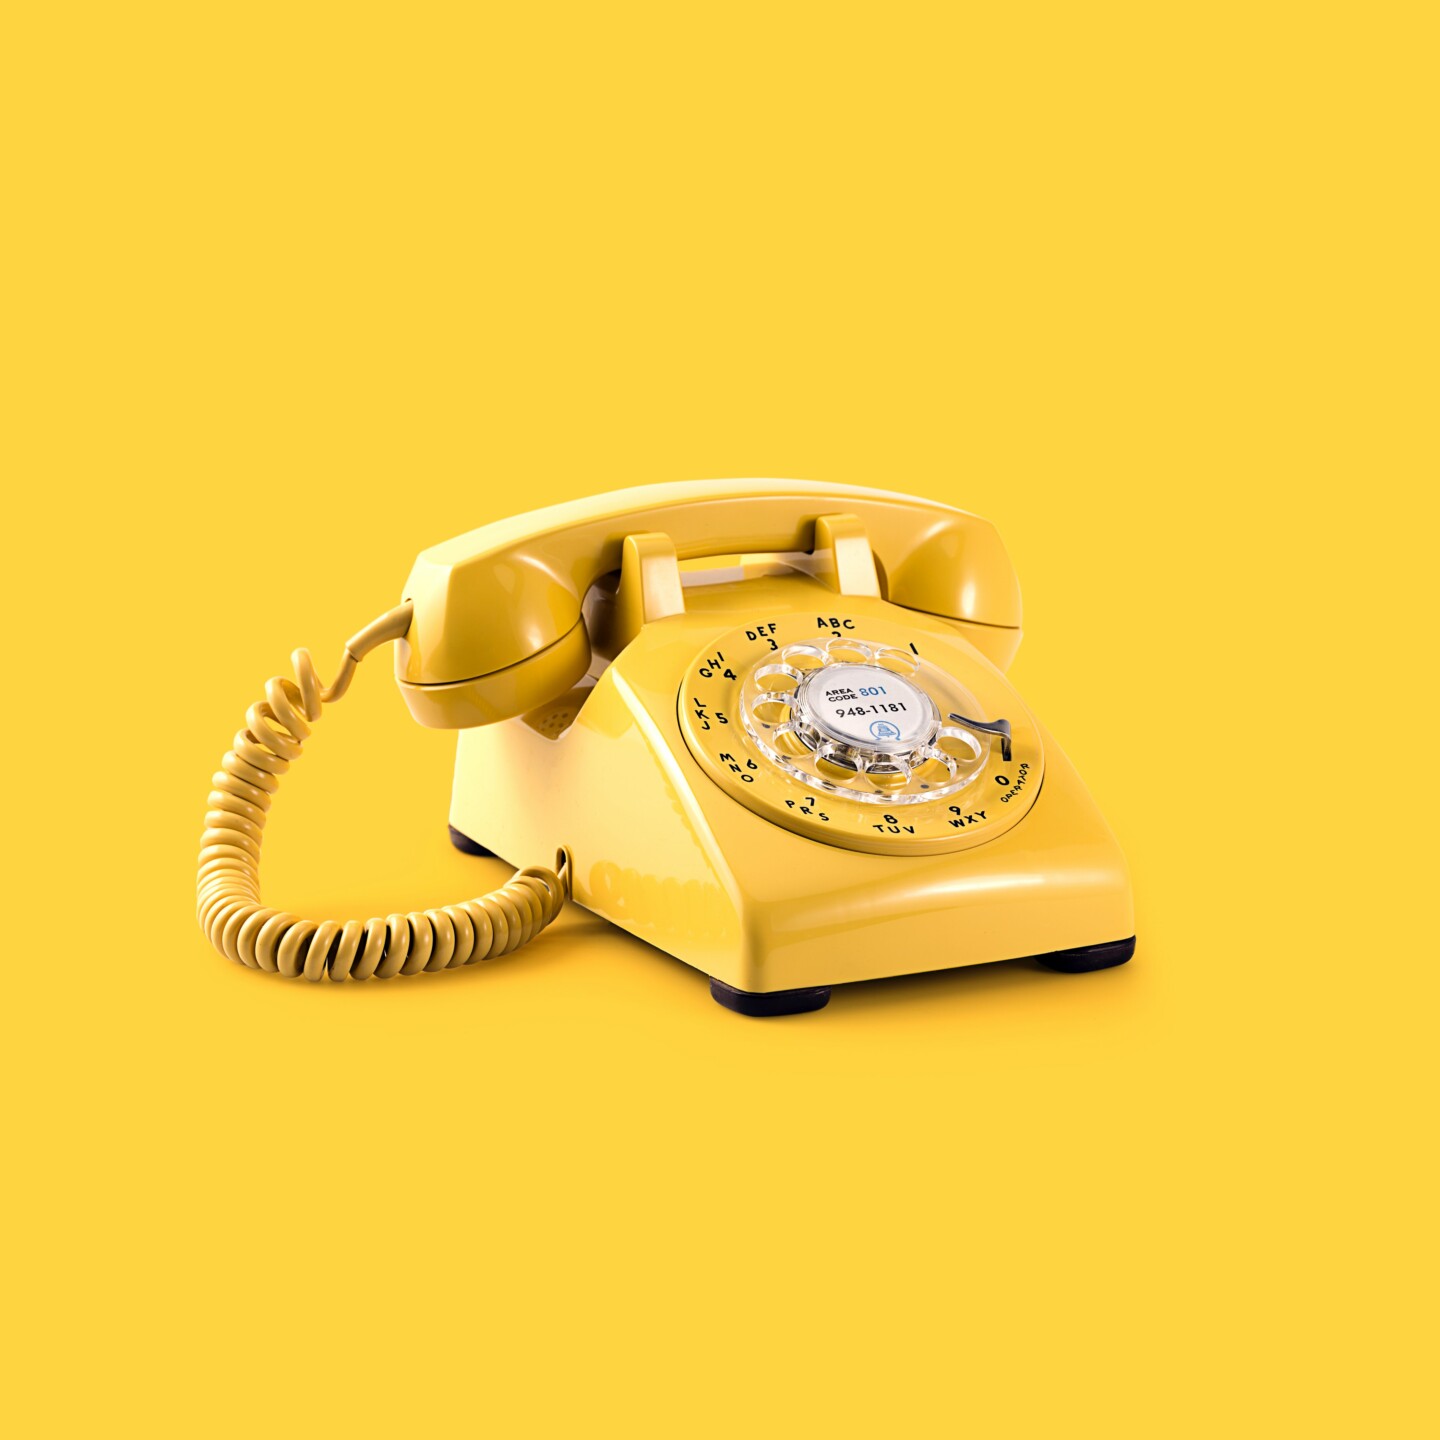 yellow old fashion phone on yellow background